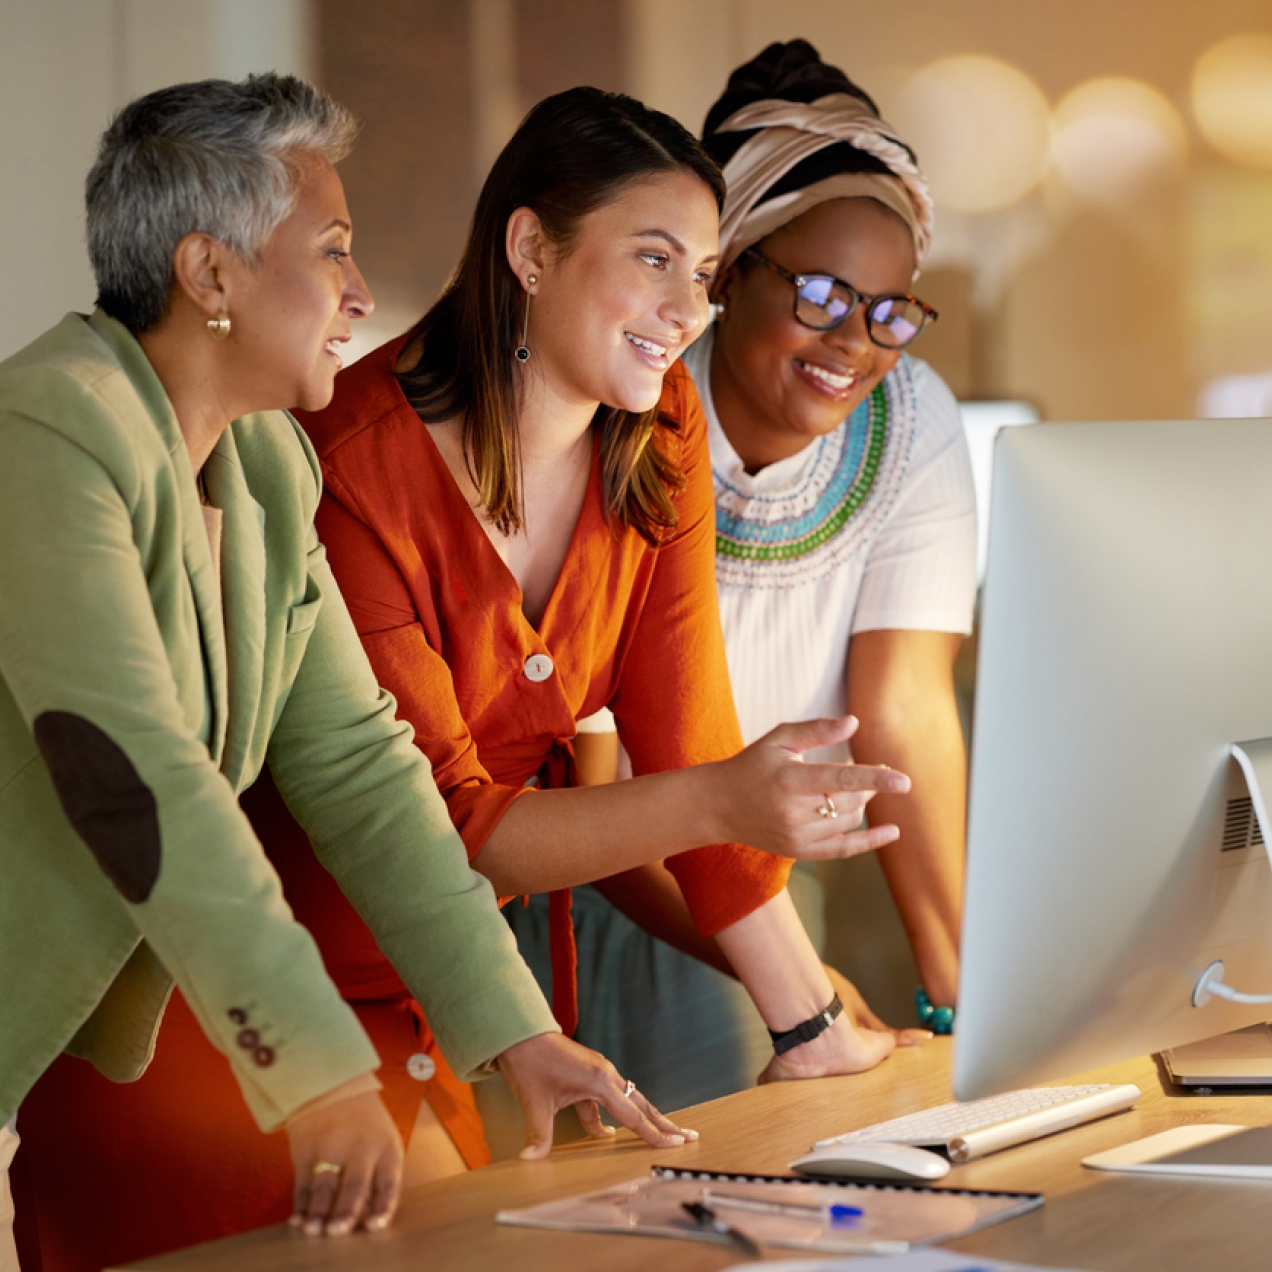 Three women of different ages and ethnicities lean over a desk looking at a computer monitor